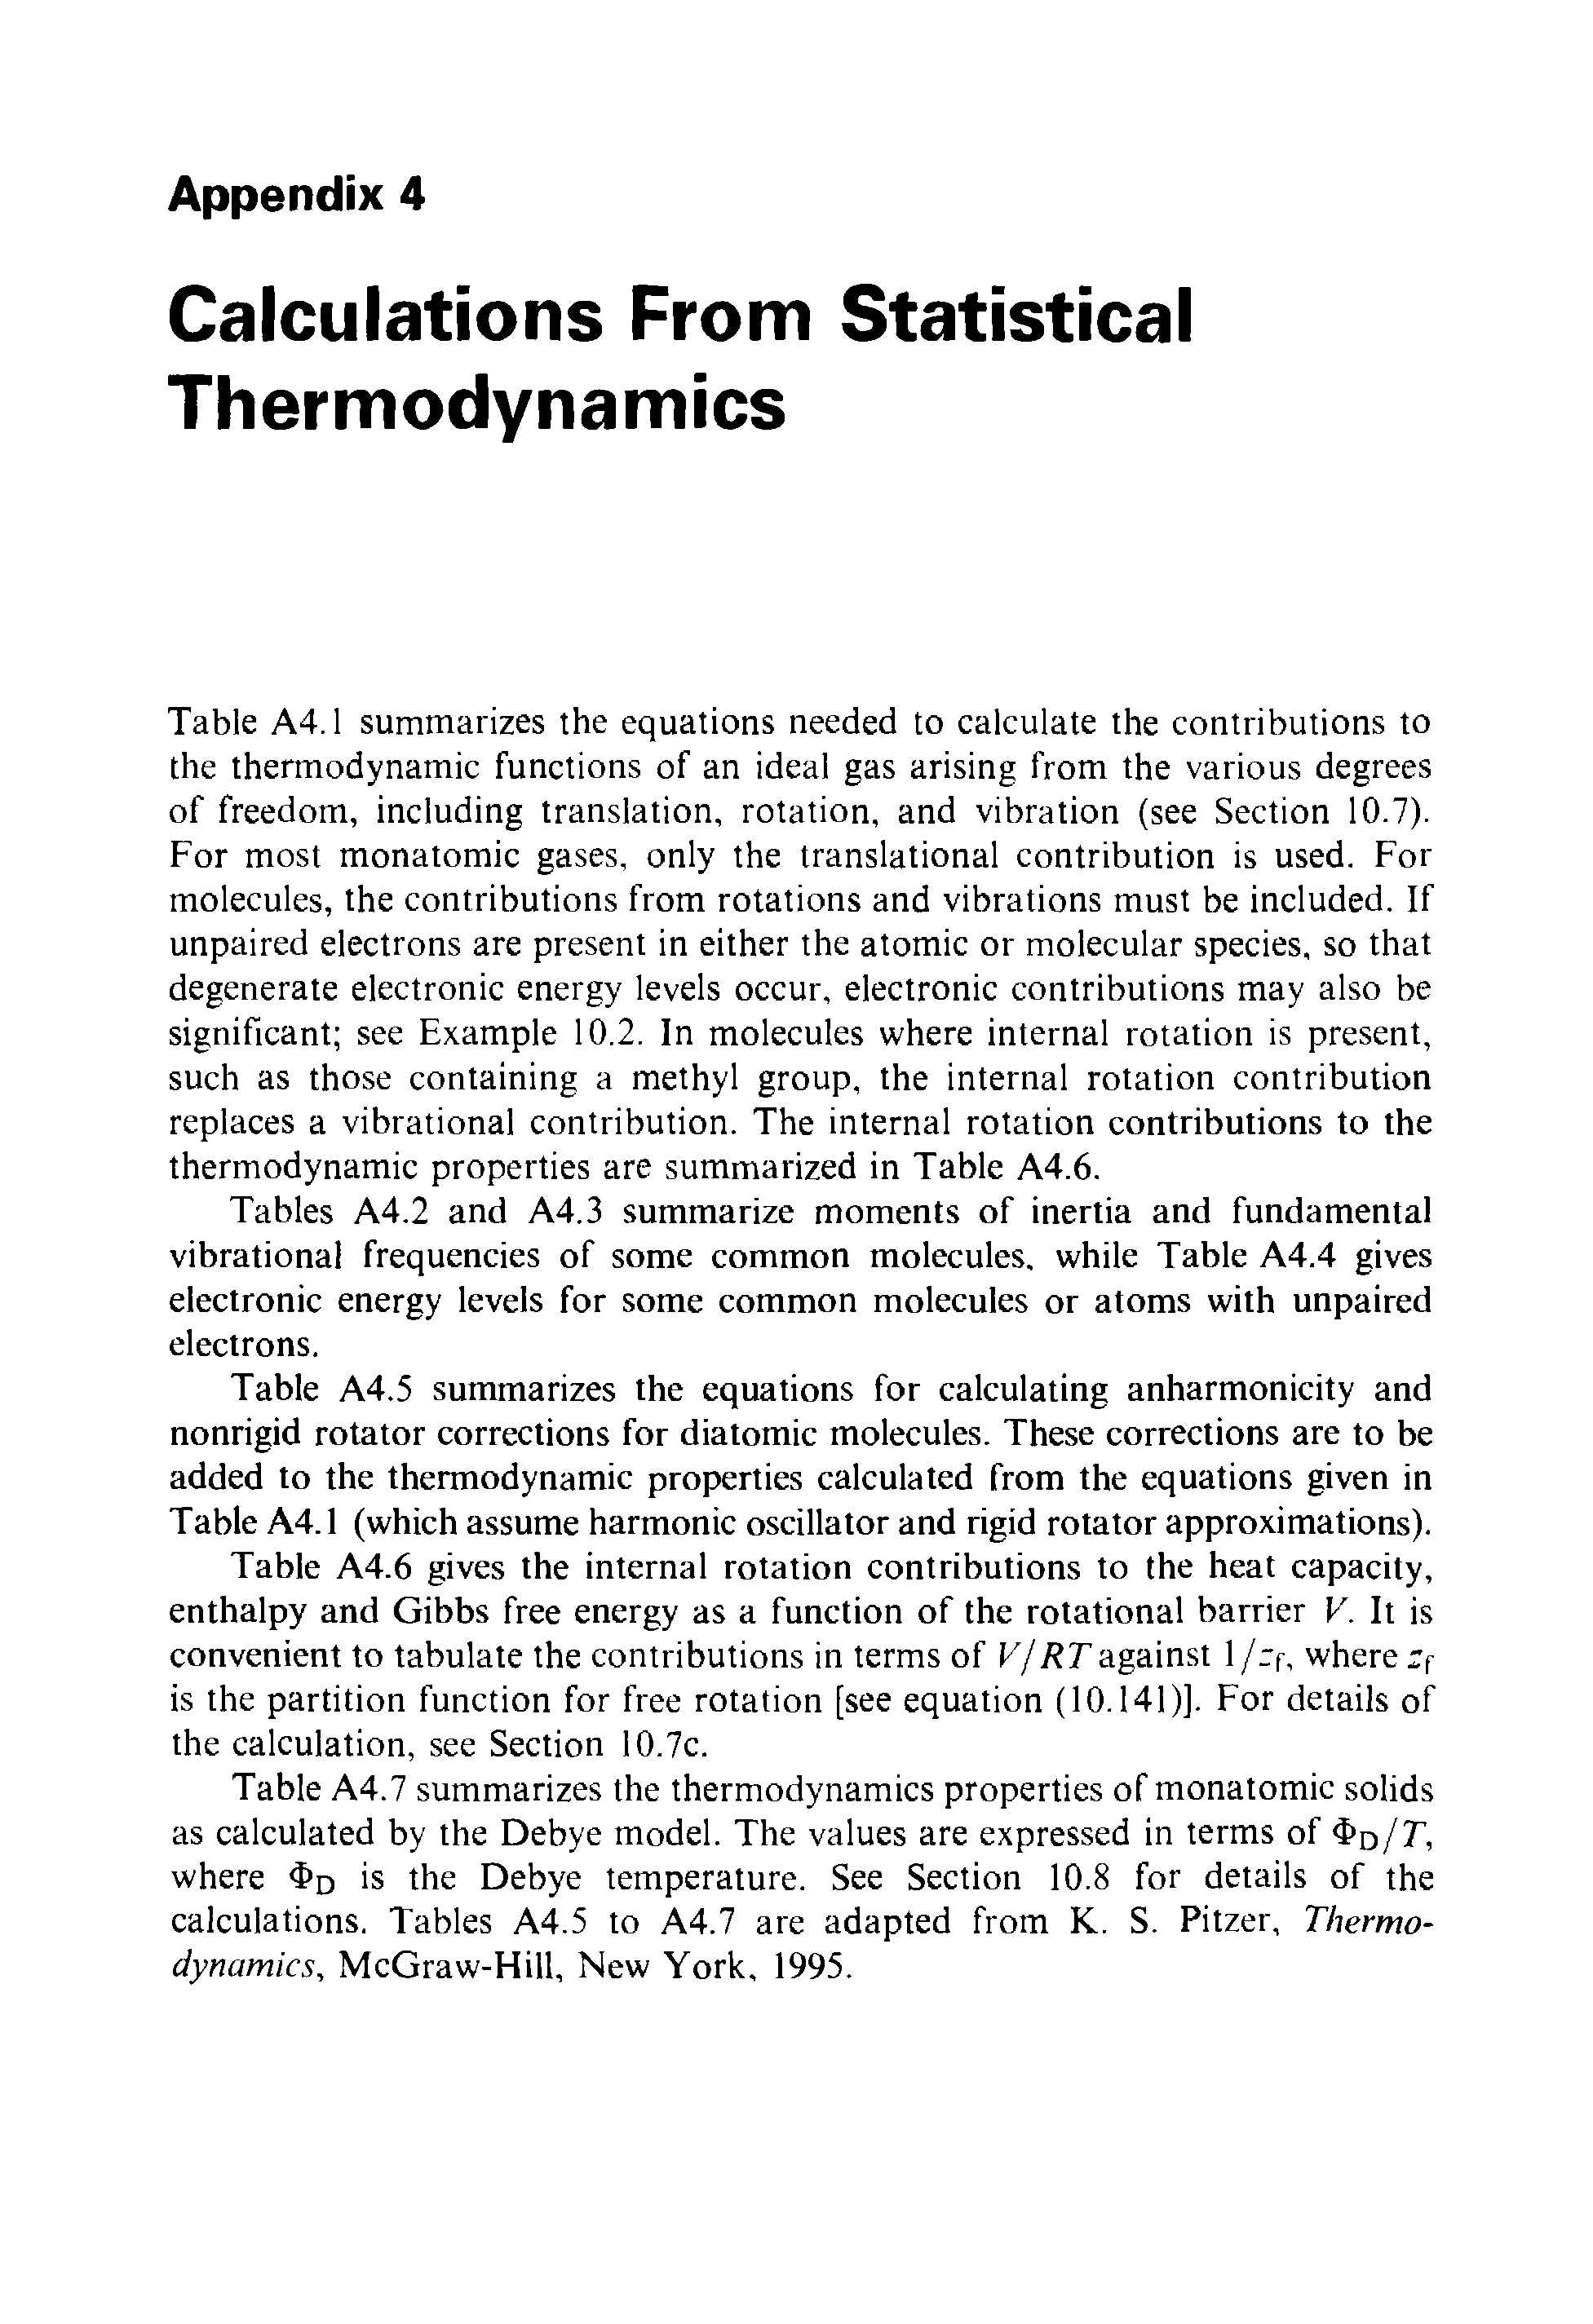 Table A4.7 summarizes the thermodynamics properties of monatomic solids as calculated by the Debye model. The values are expressed in terms of d/T, where d is the Debye temperature. See Section 10.8 for details of the calculations. Tables A4.5 to A4.7 are adapted from K. S. Pitzer, Thermodynamics, McGraw-Hill, New York, 1995.